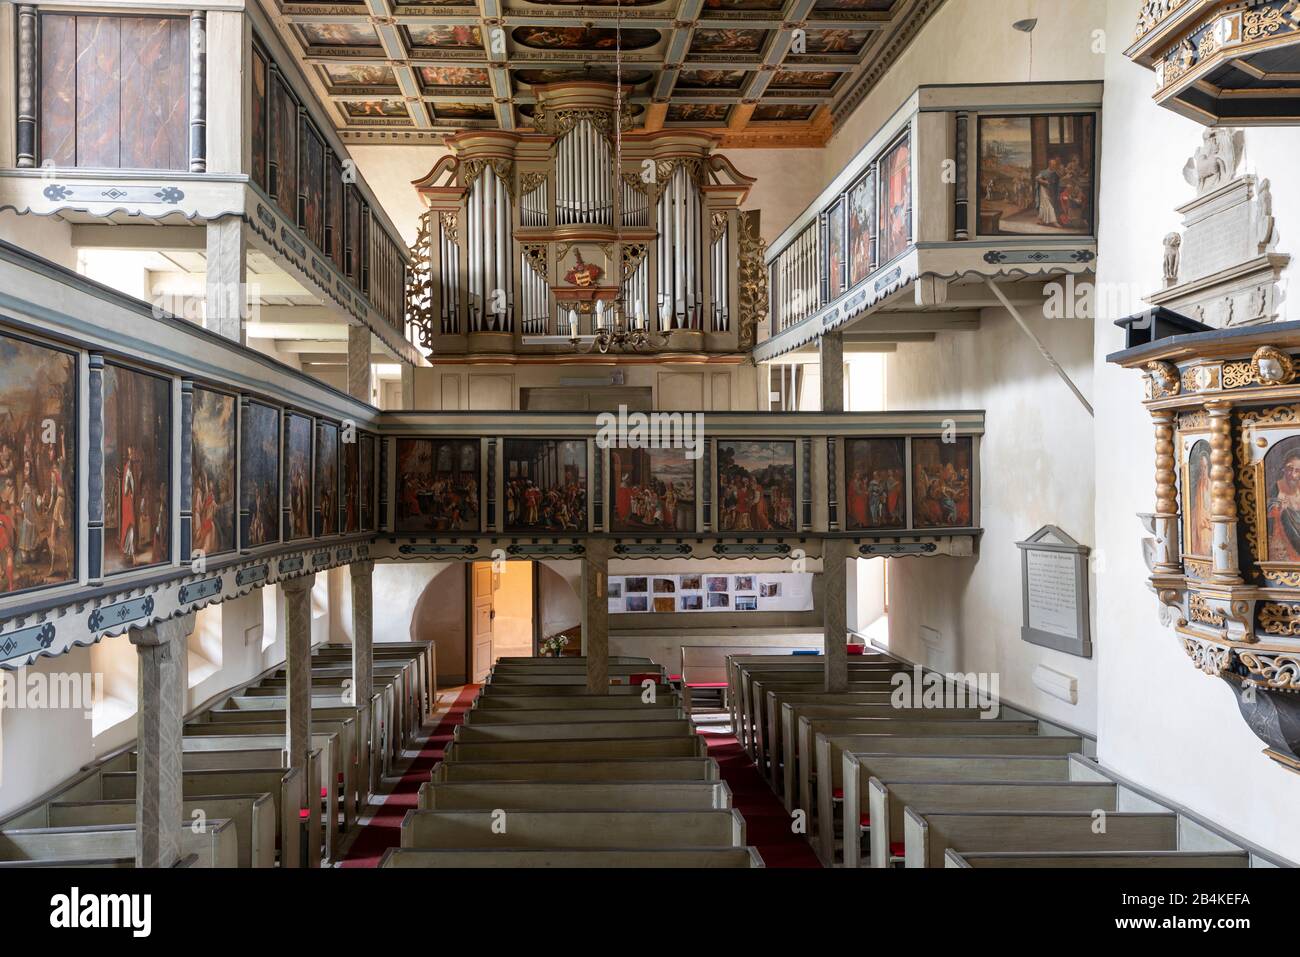 Germany, Saxony-Anhalt, Brumby, view of the organ of the Protestant village church Sankt Petri, near the highway 14. It bears the nickname Autobahnkirche Brumby. On the ceiling of the church, single-leaf woodcuts depict scenes from the Bible. Stock Photo